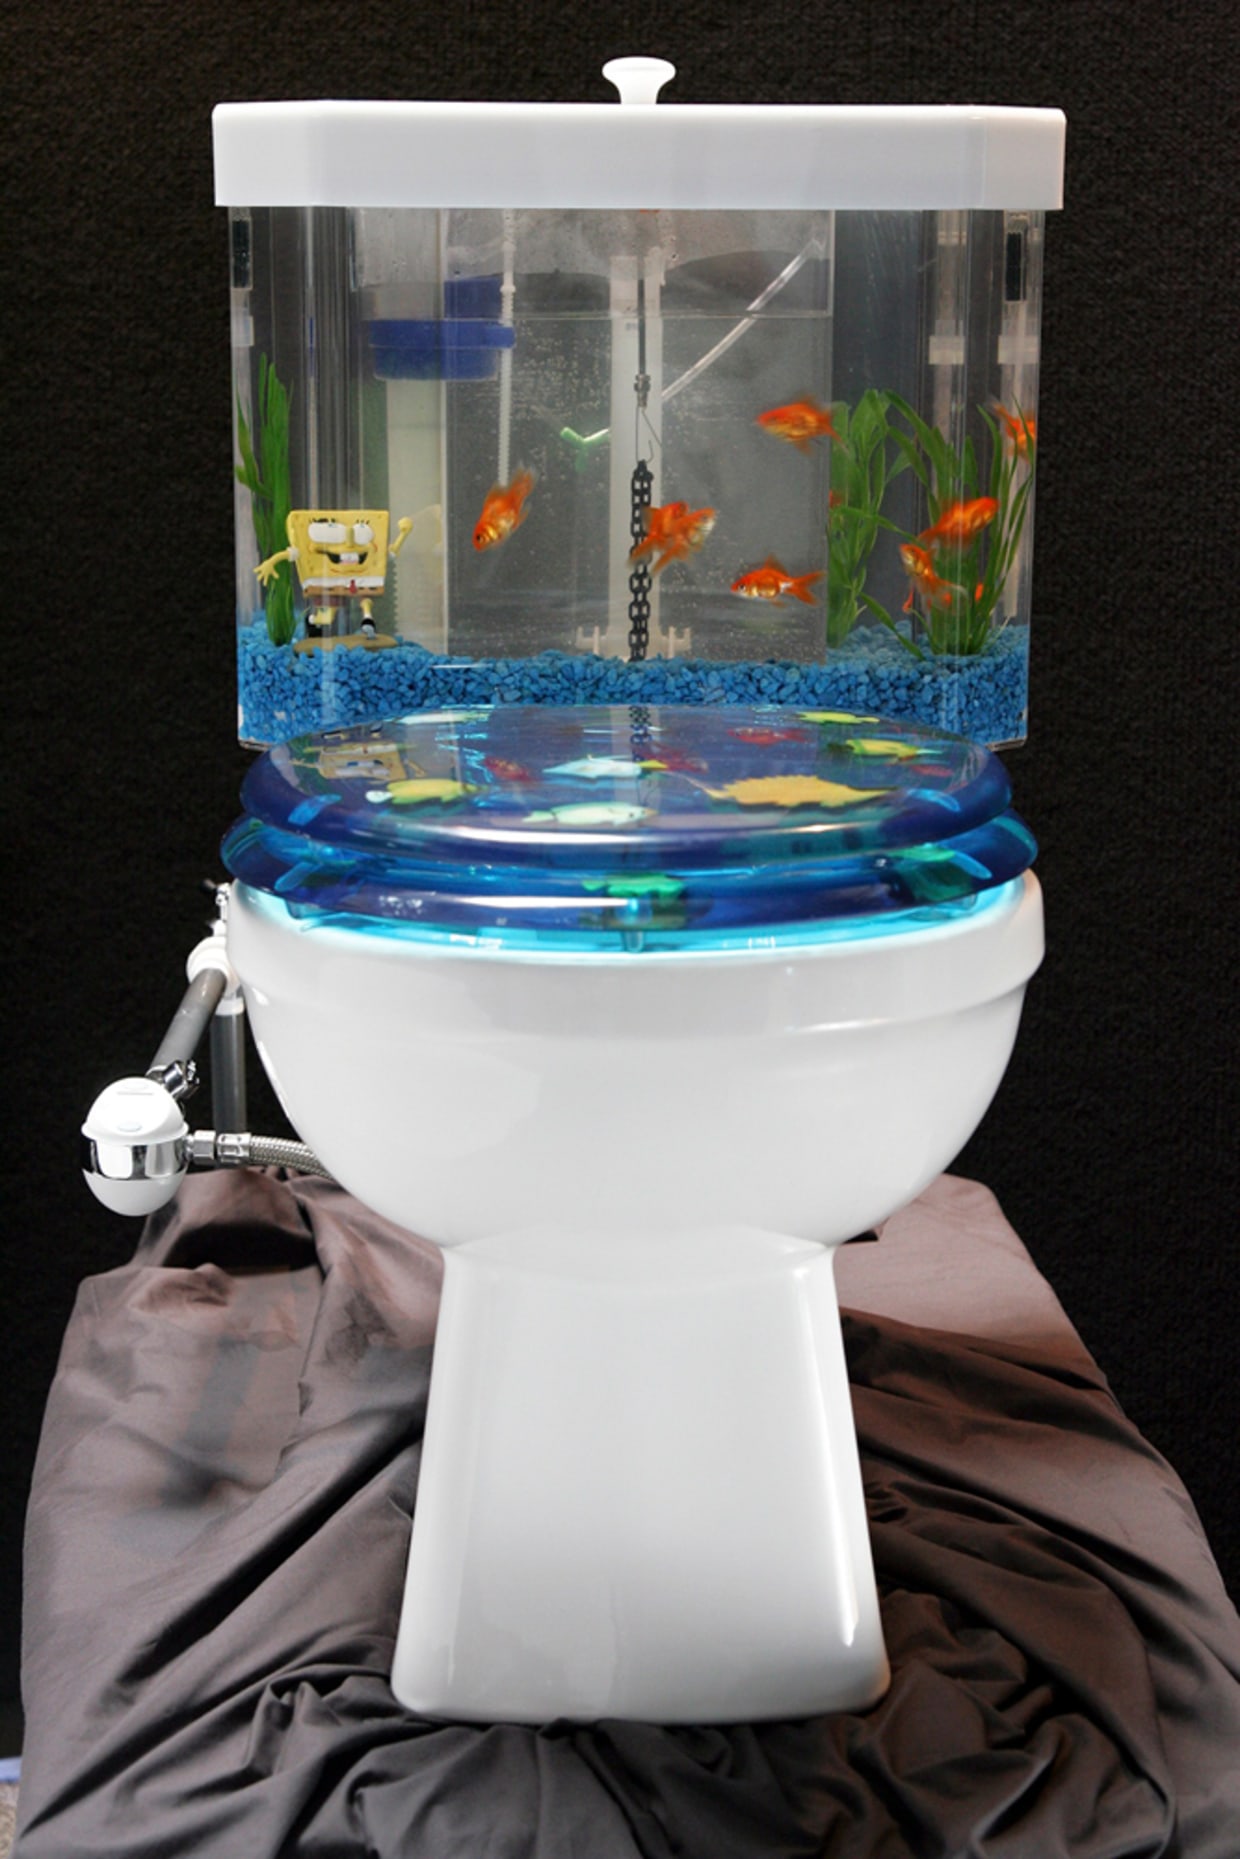 Toilet Flush - Toilet-topper lets you flush with the fishes